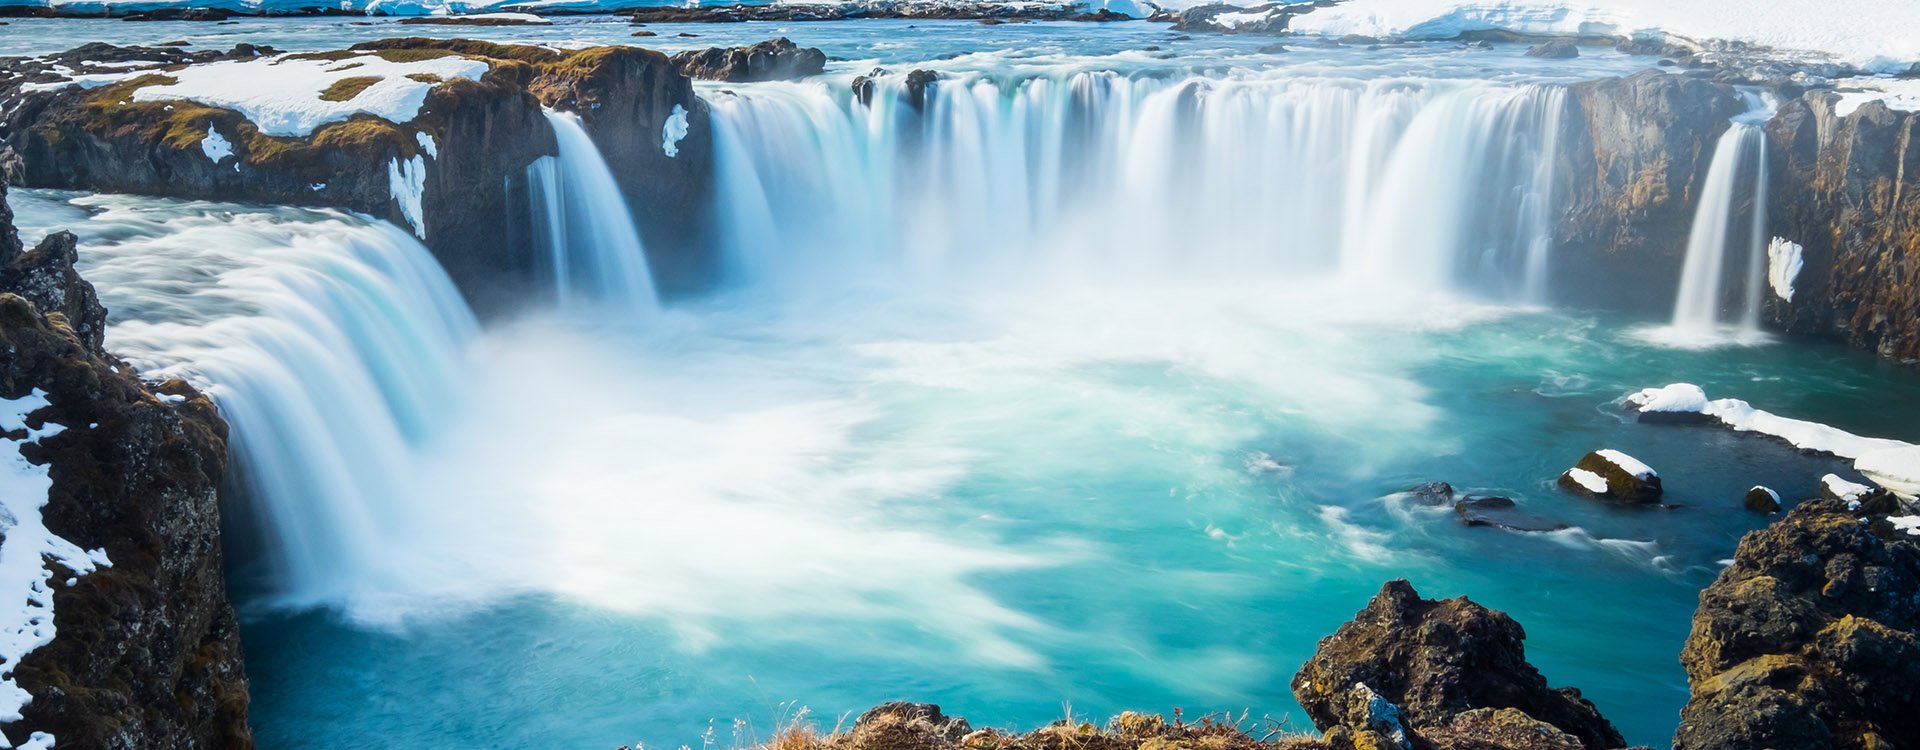 Godafoss, One of the most famous waterfalls in Iceland.